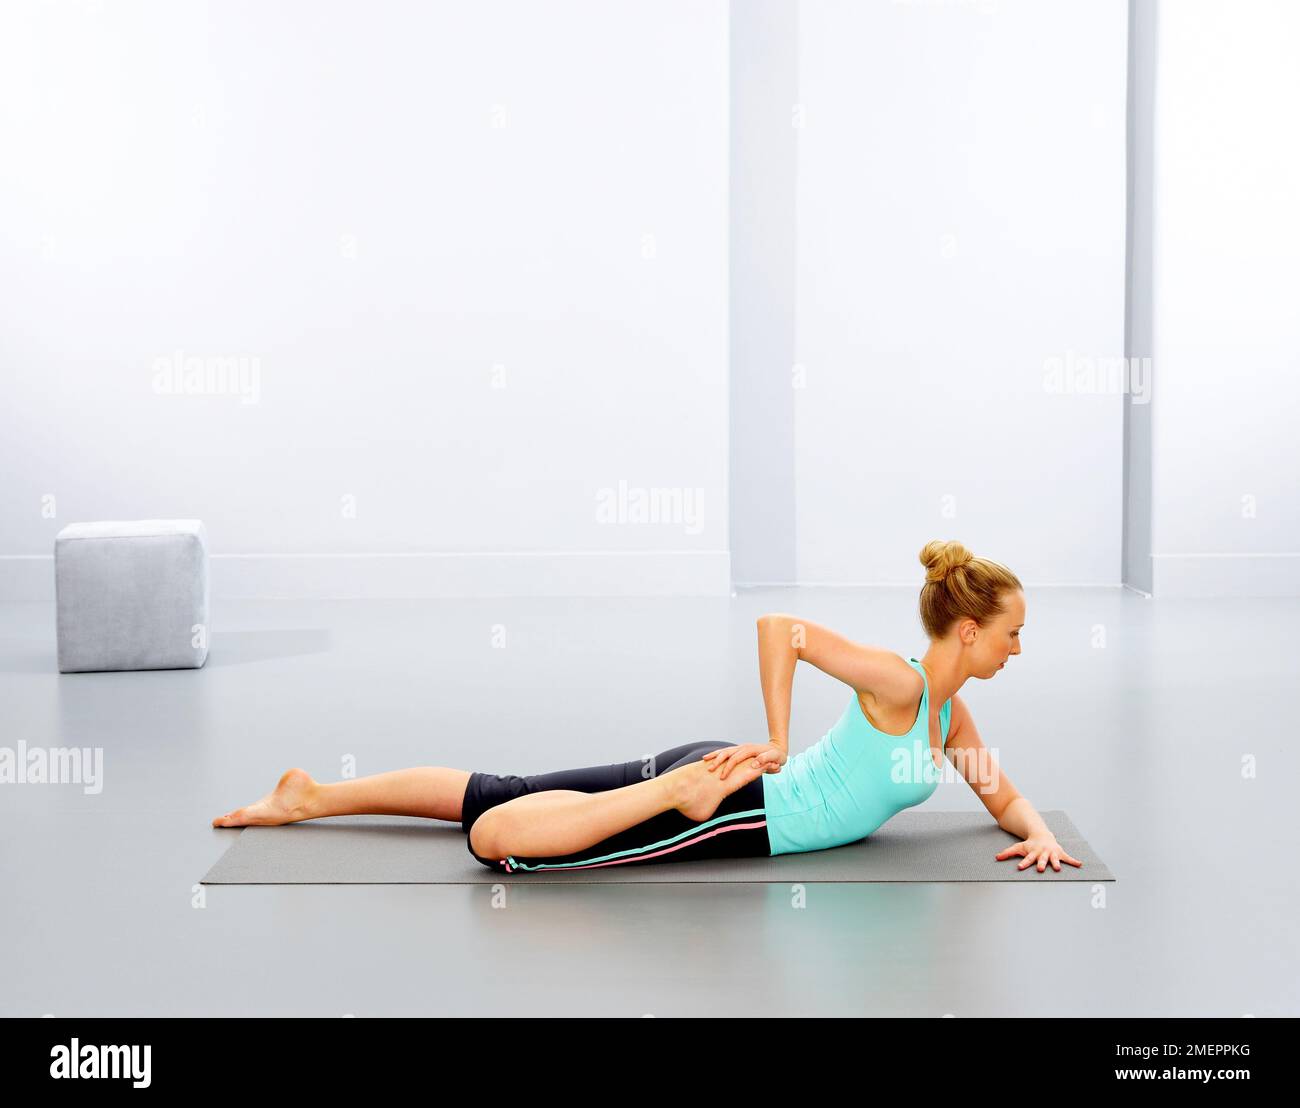 Woman performing yoga exercise on mat, side view Stock Photo